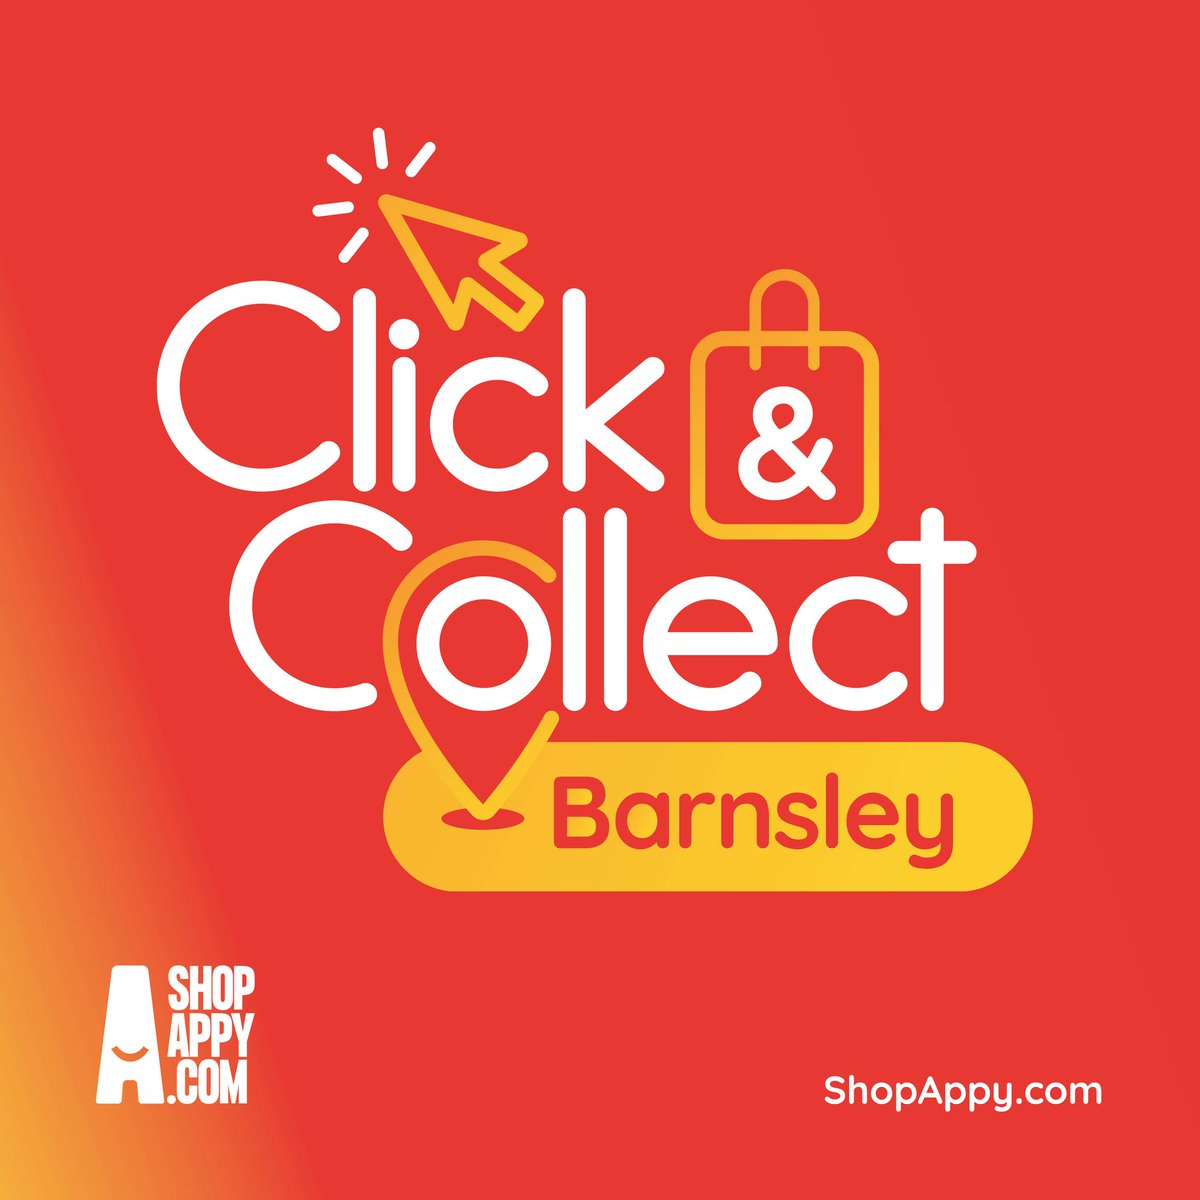 For a limited time, if you spend over £10 on ShopAppy and pick up your order from a Collection Hub, you will receive a £5 Barnsley Gift Card to use on your next shop! There are 200 cards to giveaway, so make sure not to miss out. shopappy.com/barnsley/ #LoveLocal